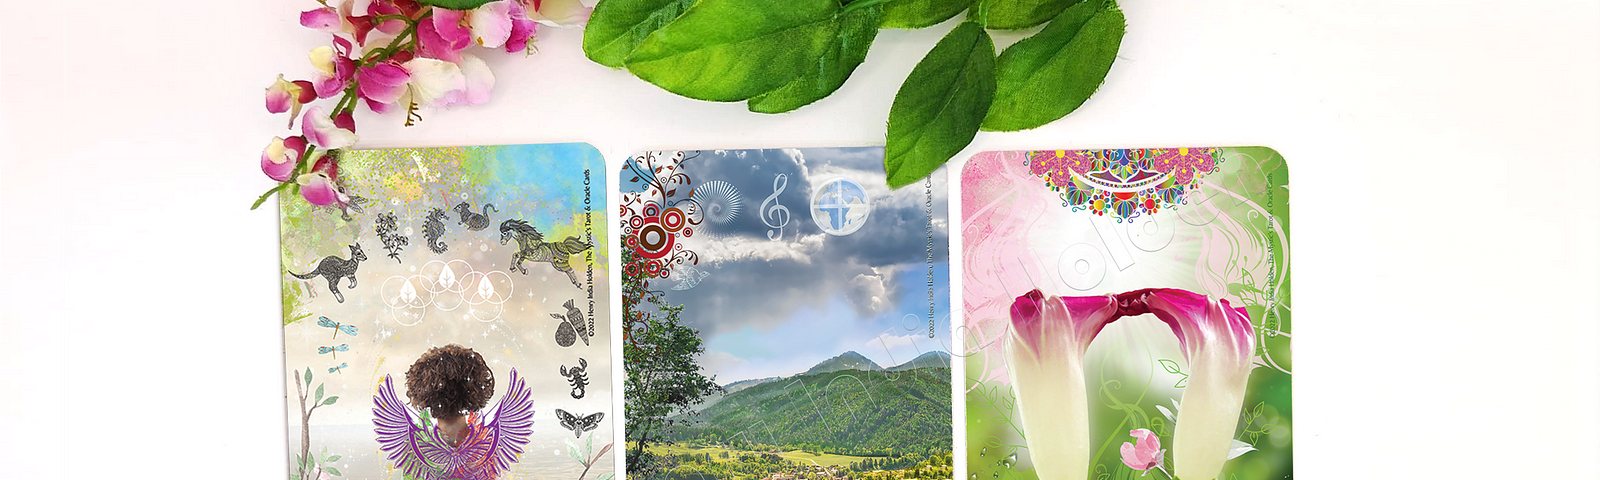 Eco-Magic, Natura, and Enchantment. Three colorful and positive cards from the deck, The Mystic’s Tarot & Oracle Cards by the author of the article.